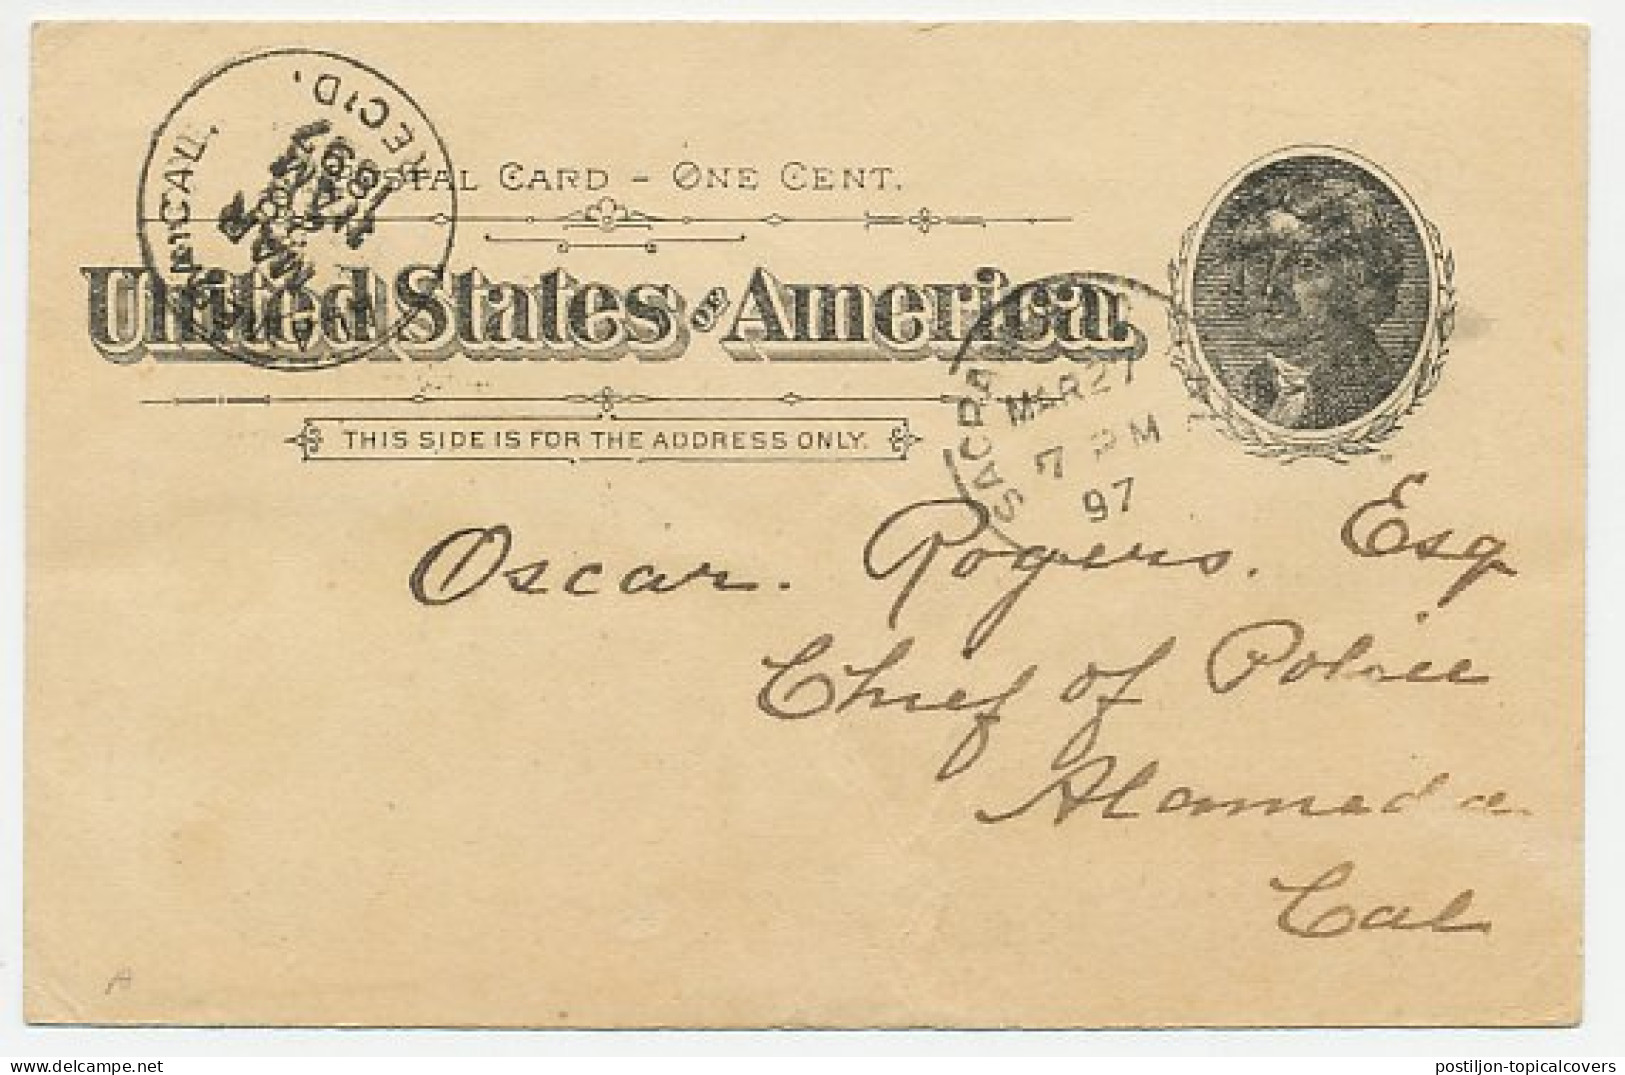 Postal Stationery USA 1897 Search Notice - Stolen Horse - Ippica